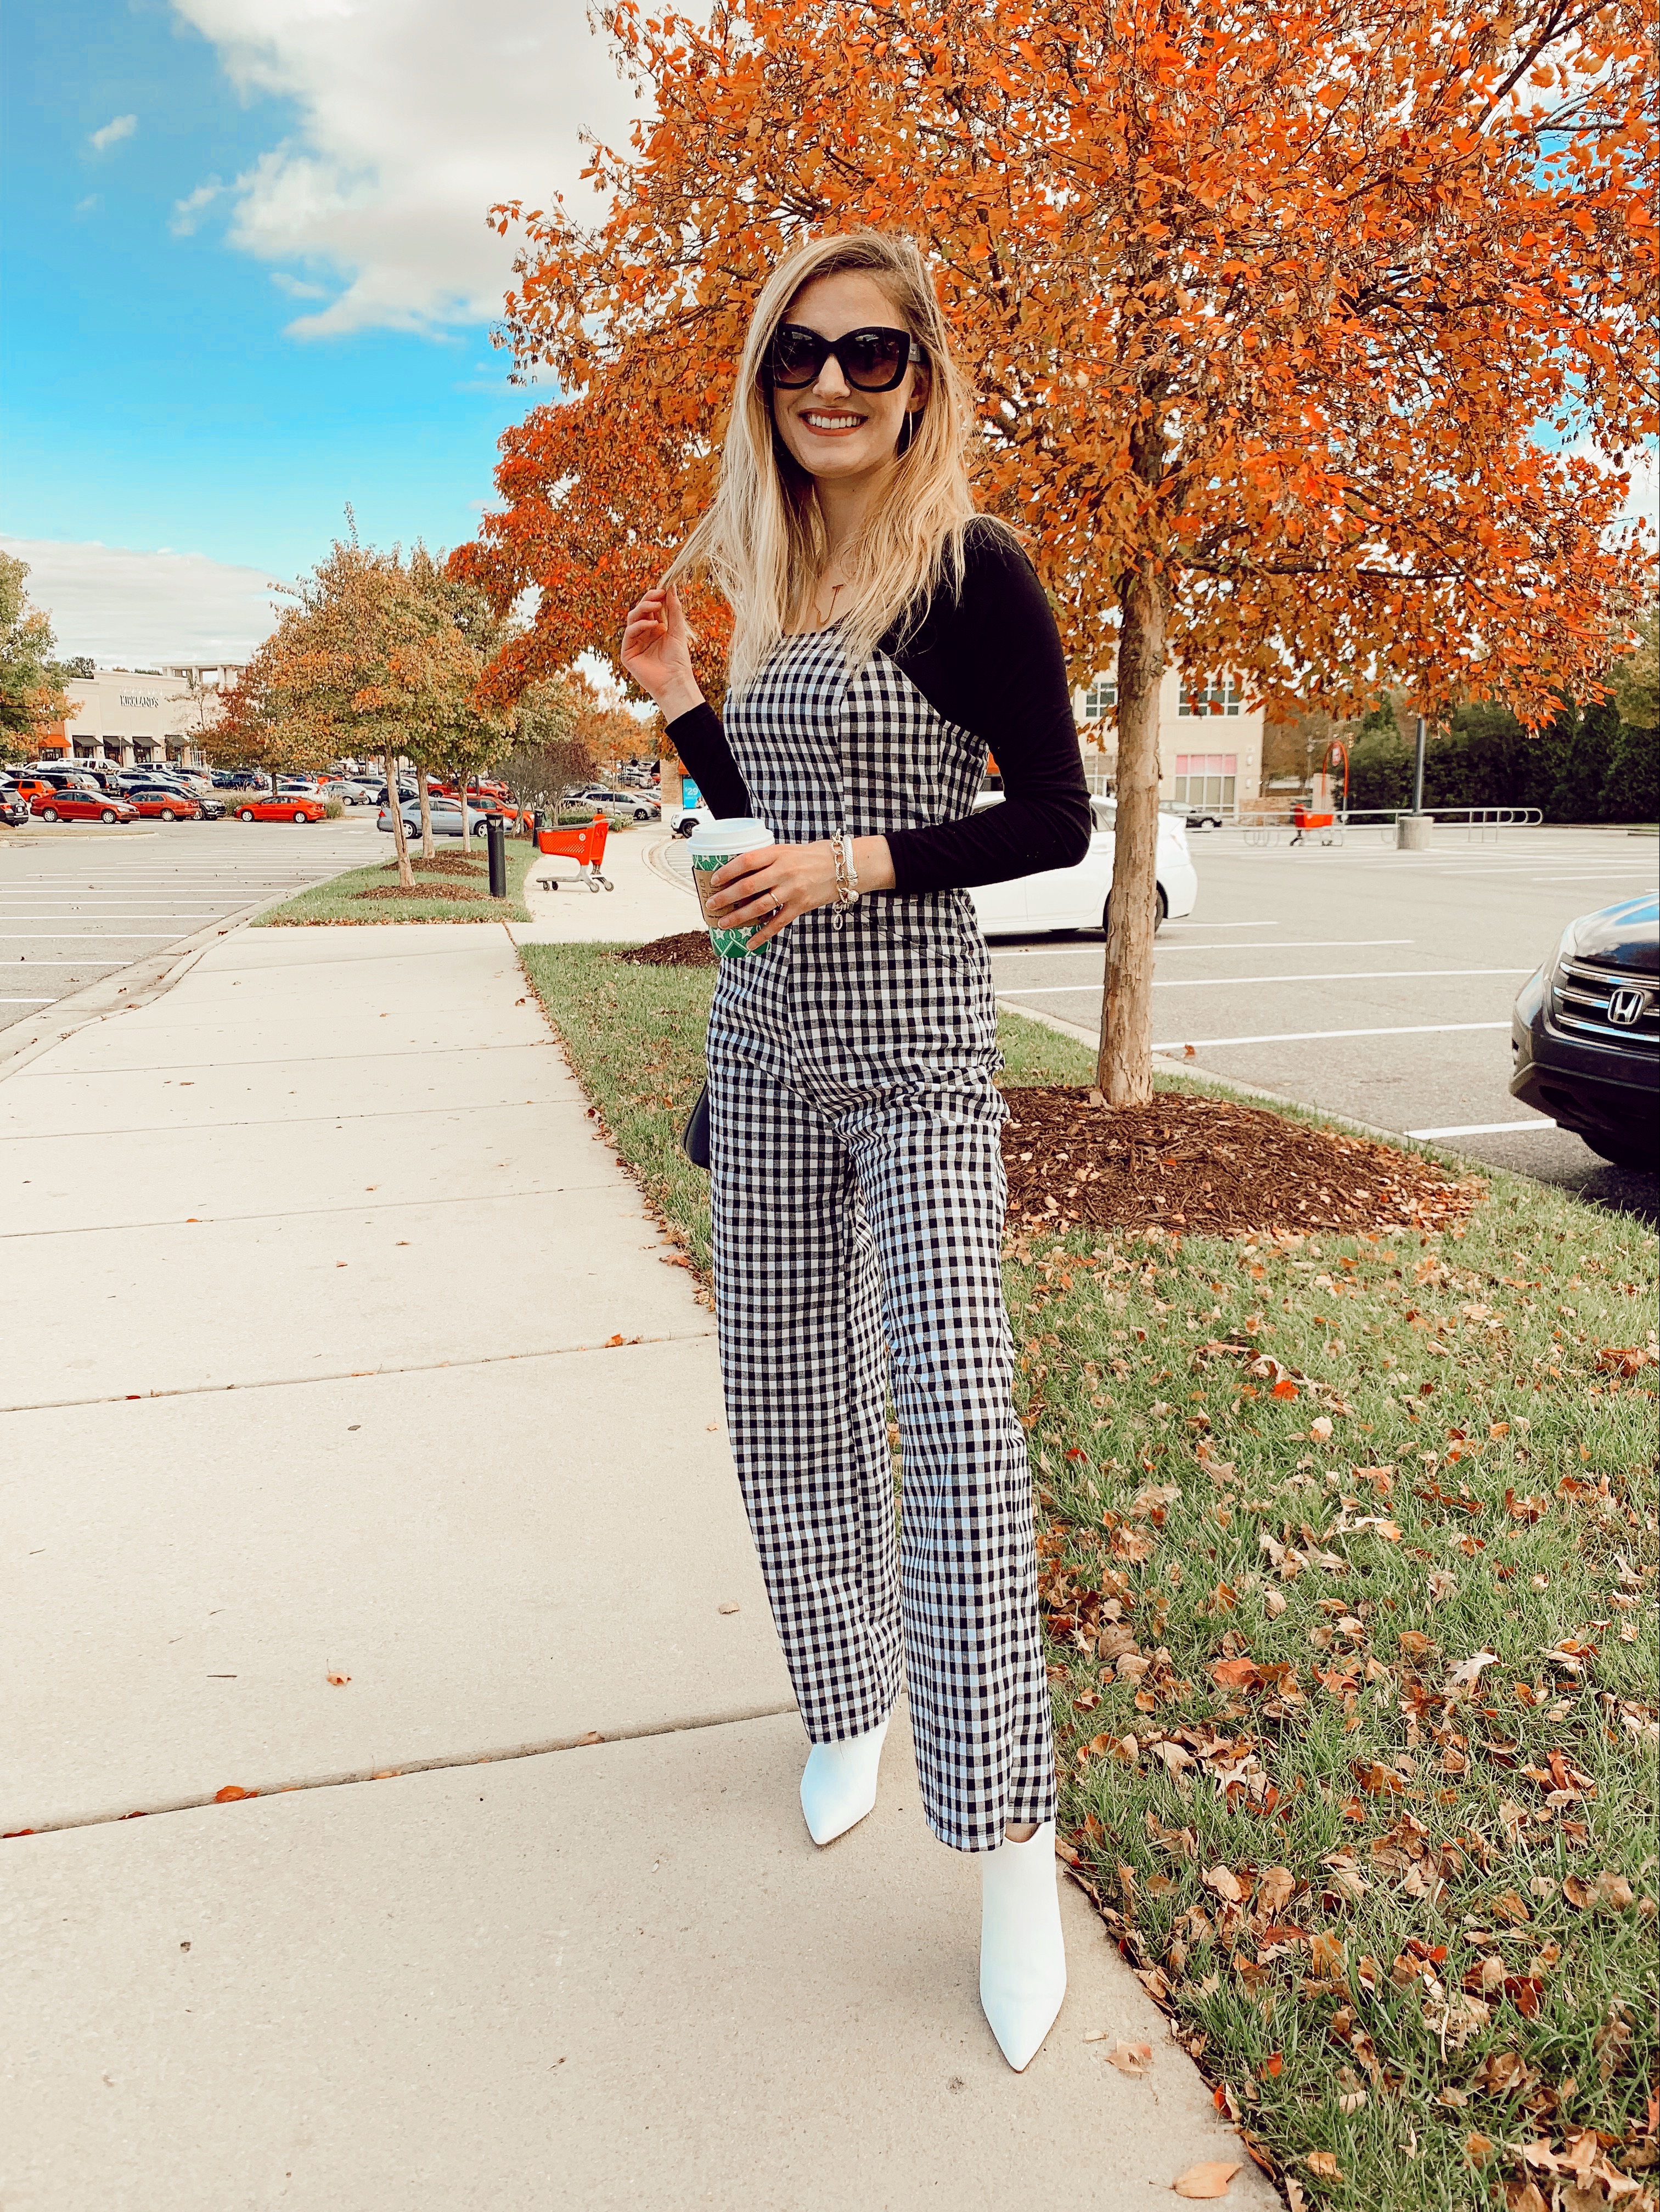 Fashion Inspiration by North Carolina fashion and lifestyle blogger Jessica Linn. Wearing a black and white checkered jumpsuit and white pointed toe boots.